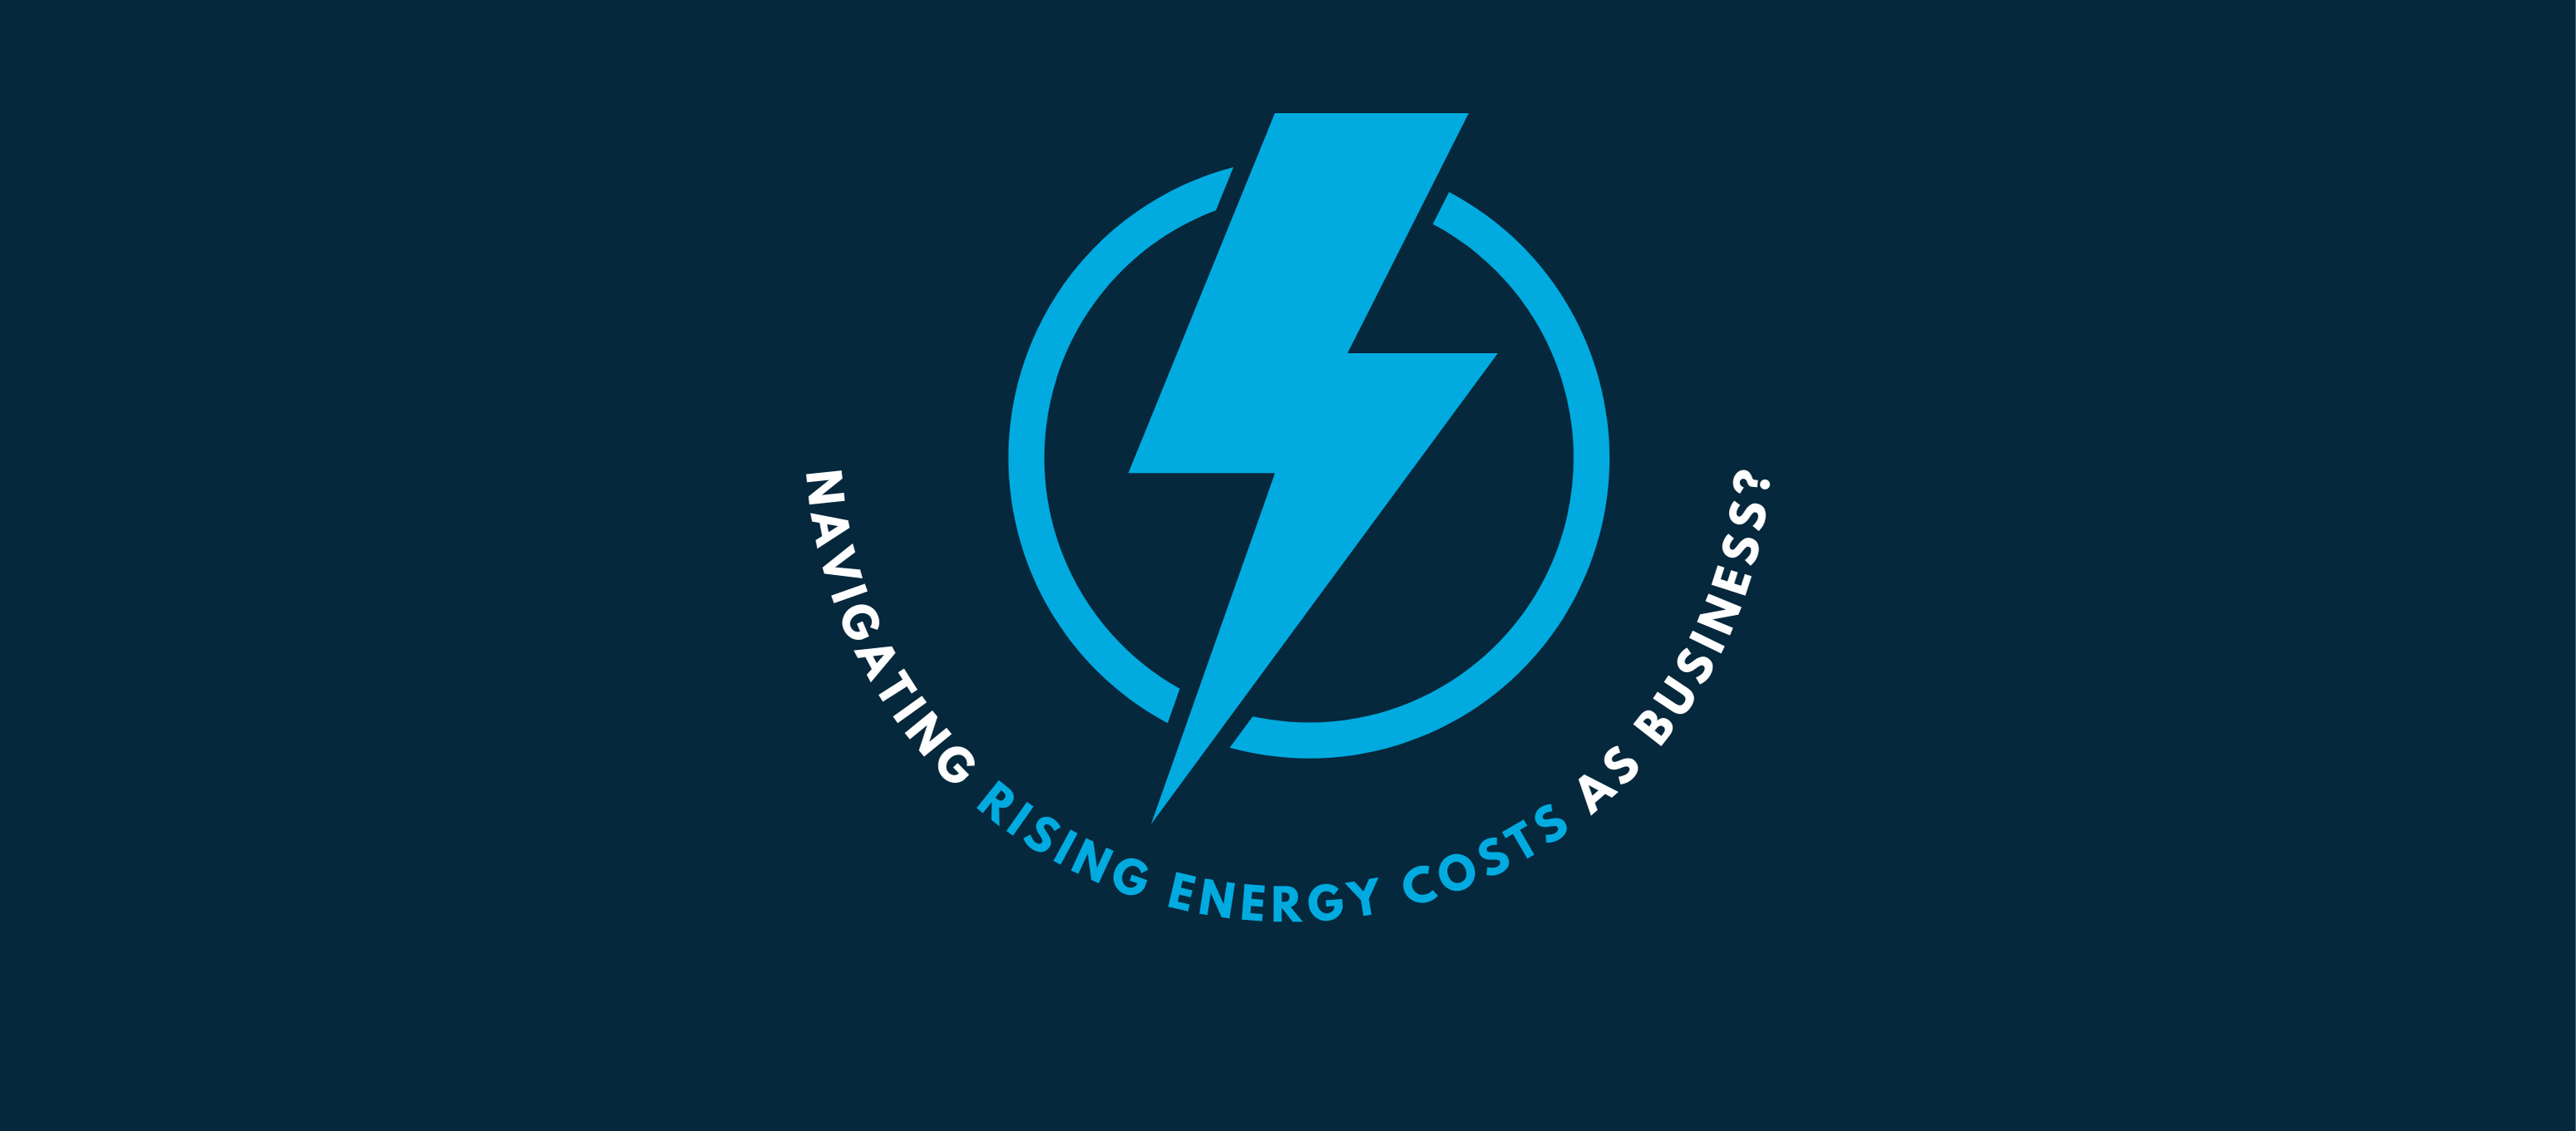 Navigating Rising Energy Costs as Business?